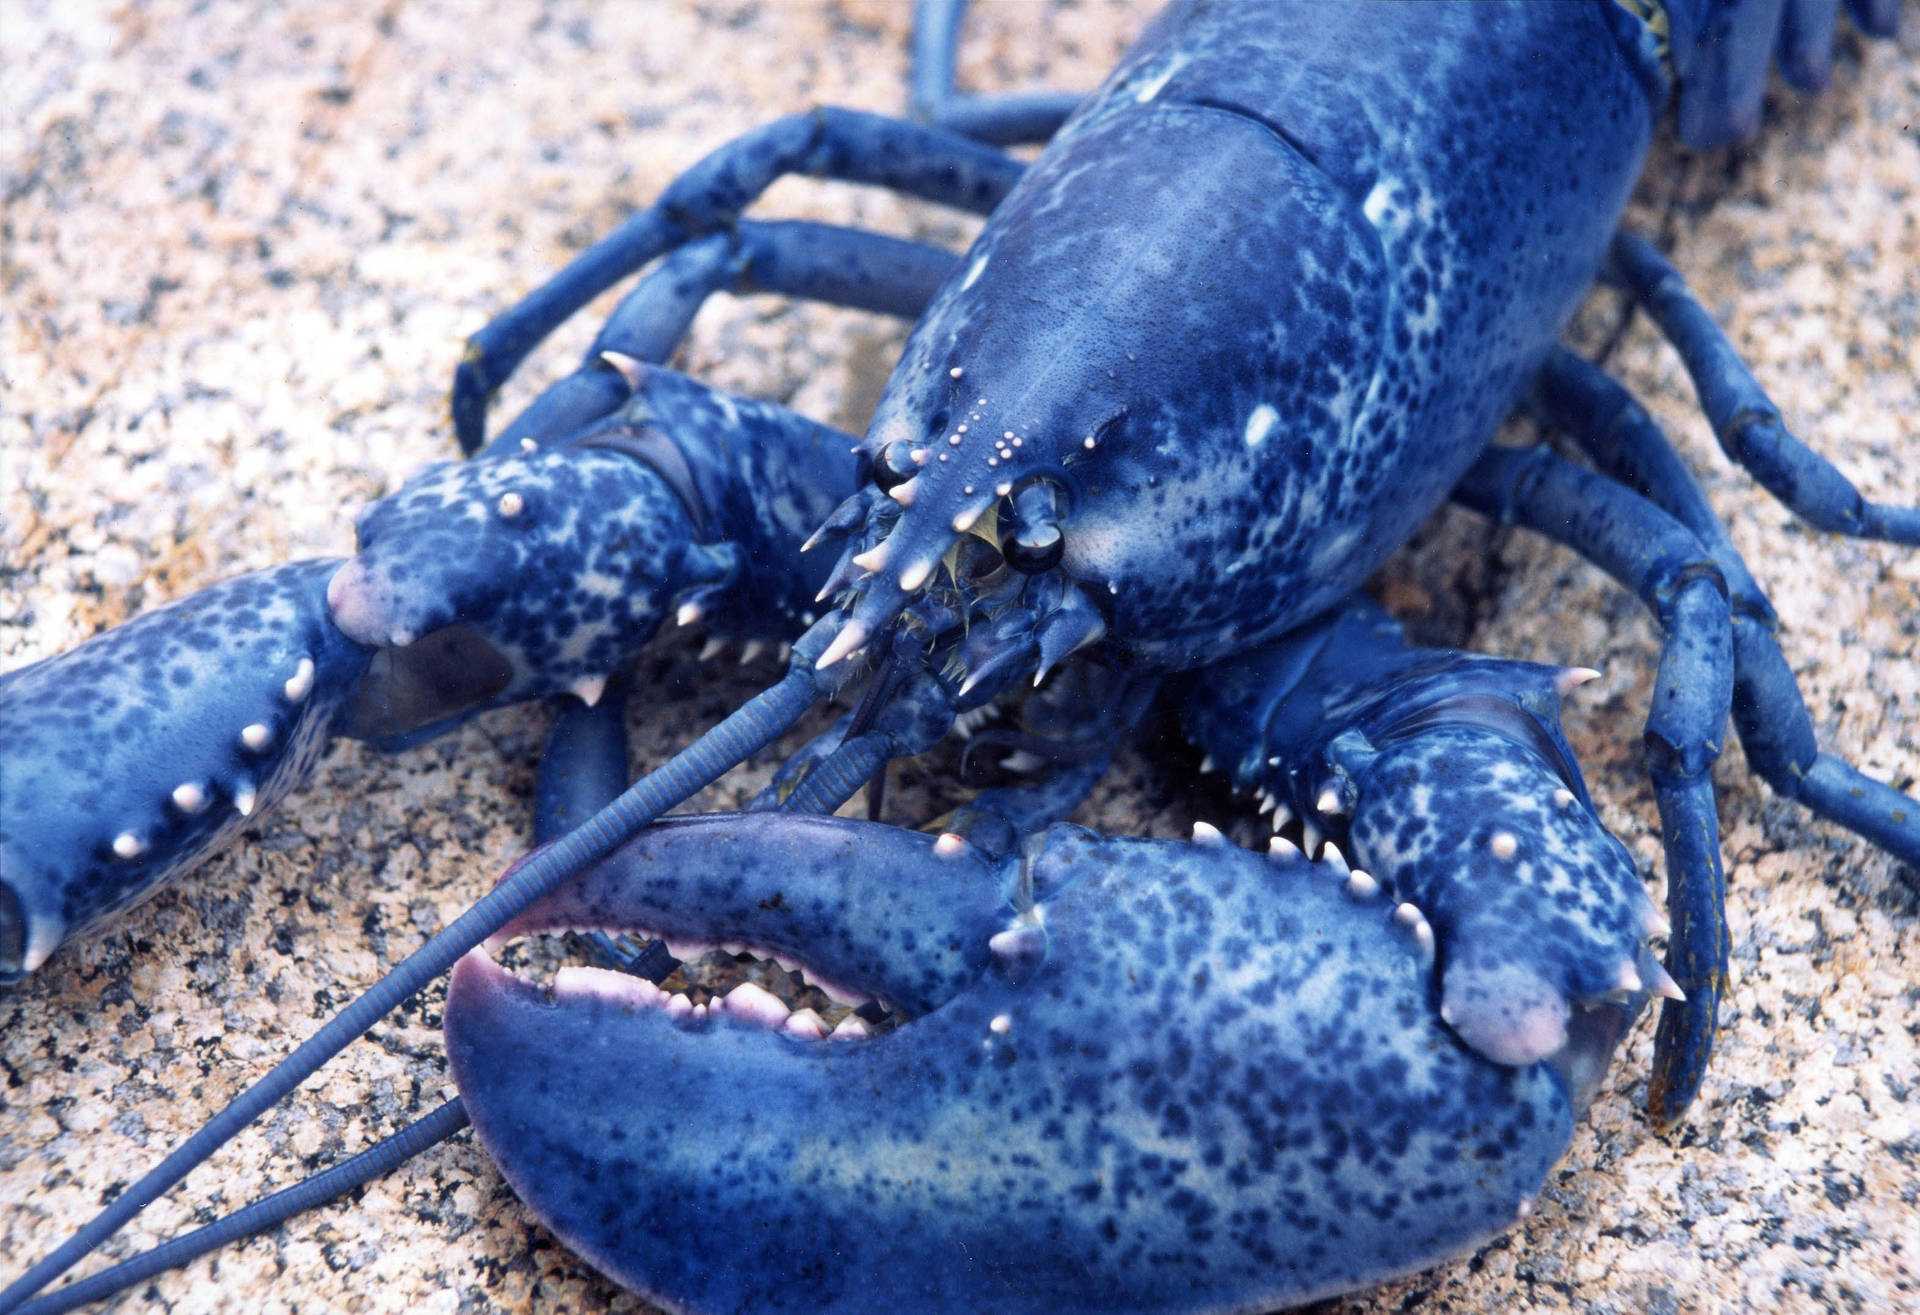 Rare Blue Lobster With Huge Claws Background